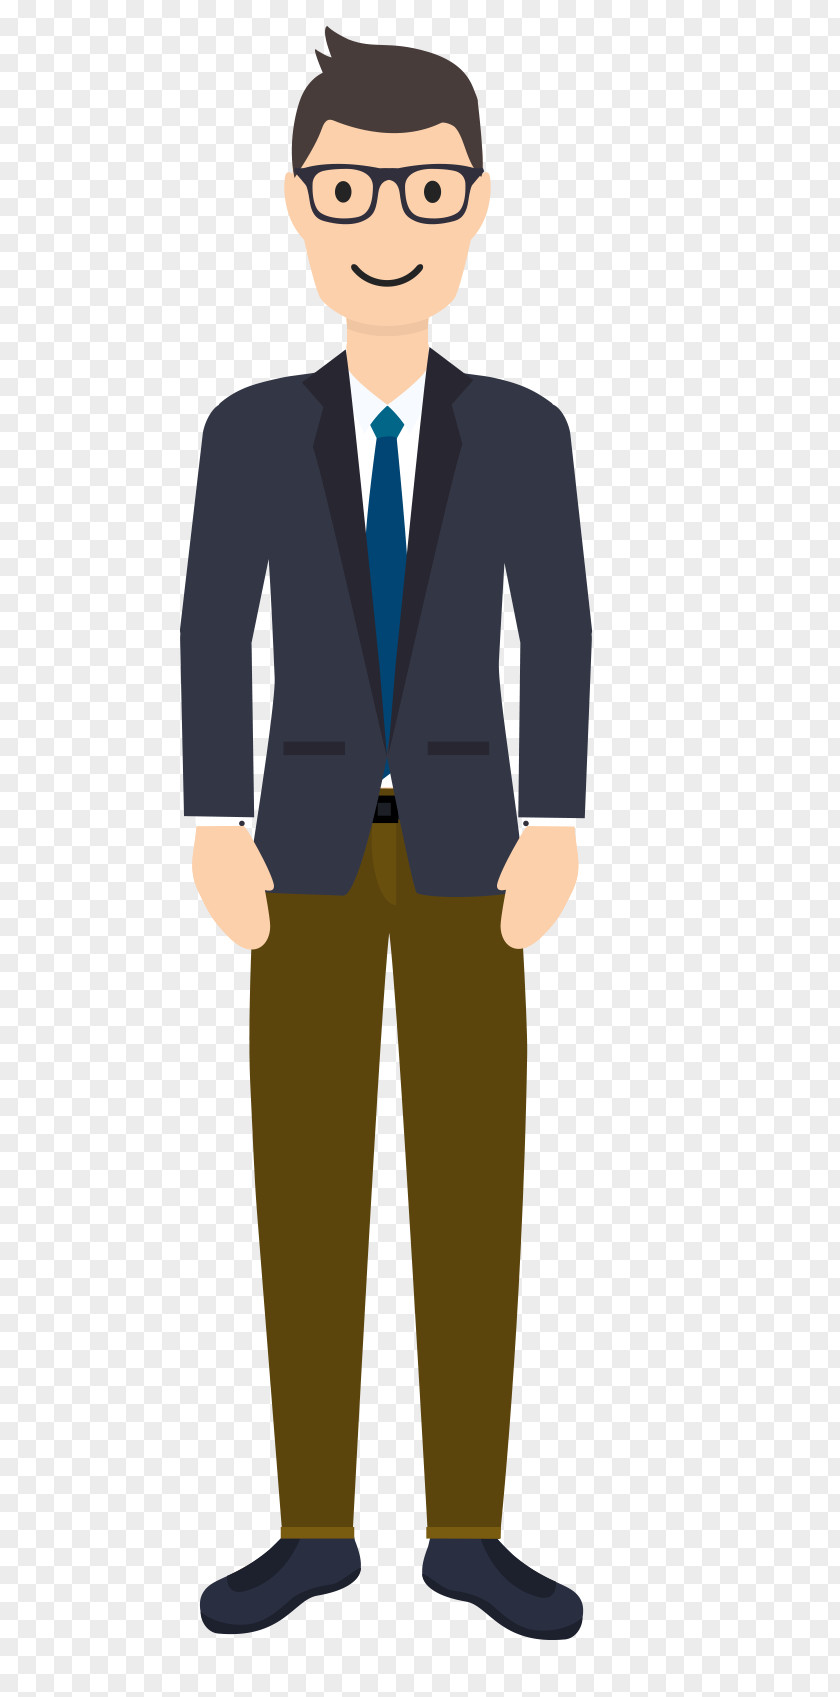 A Man In Suit PNG